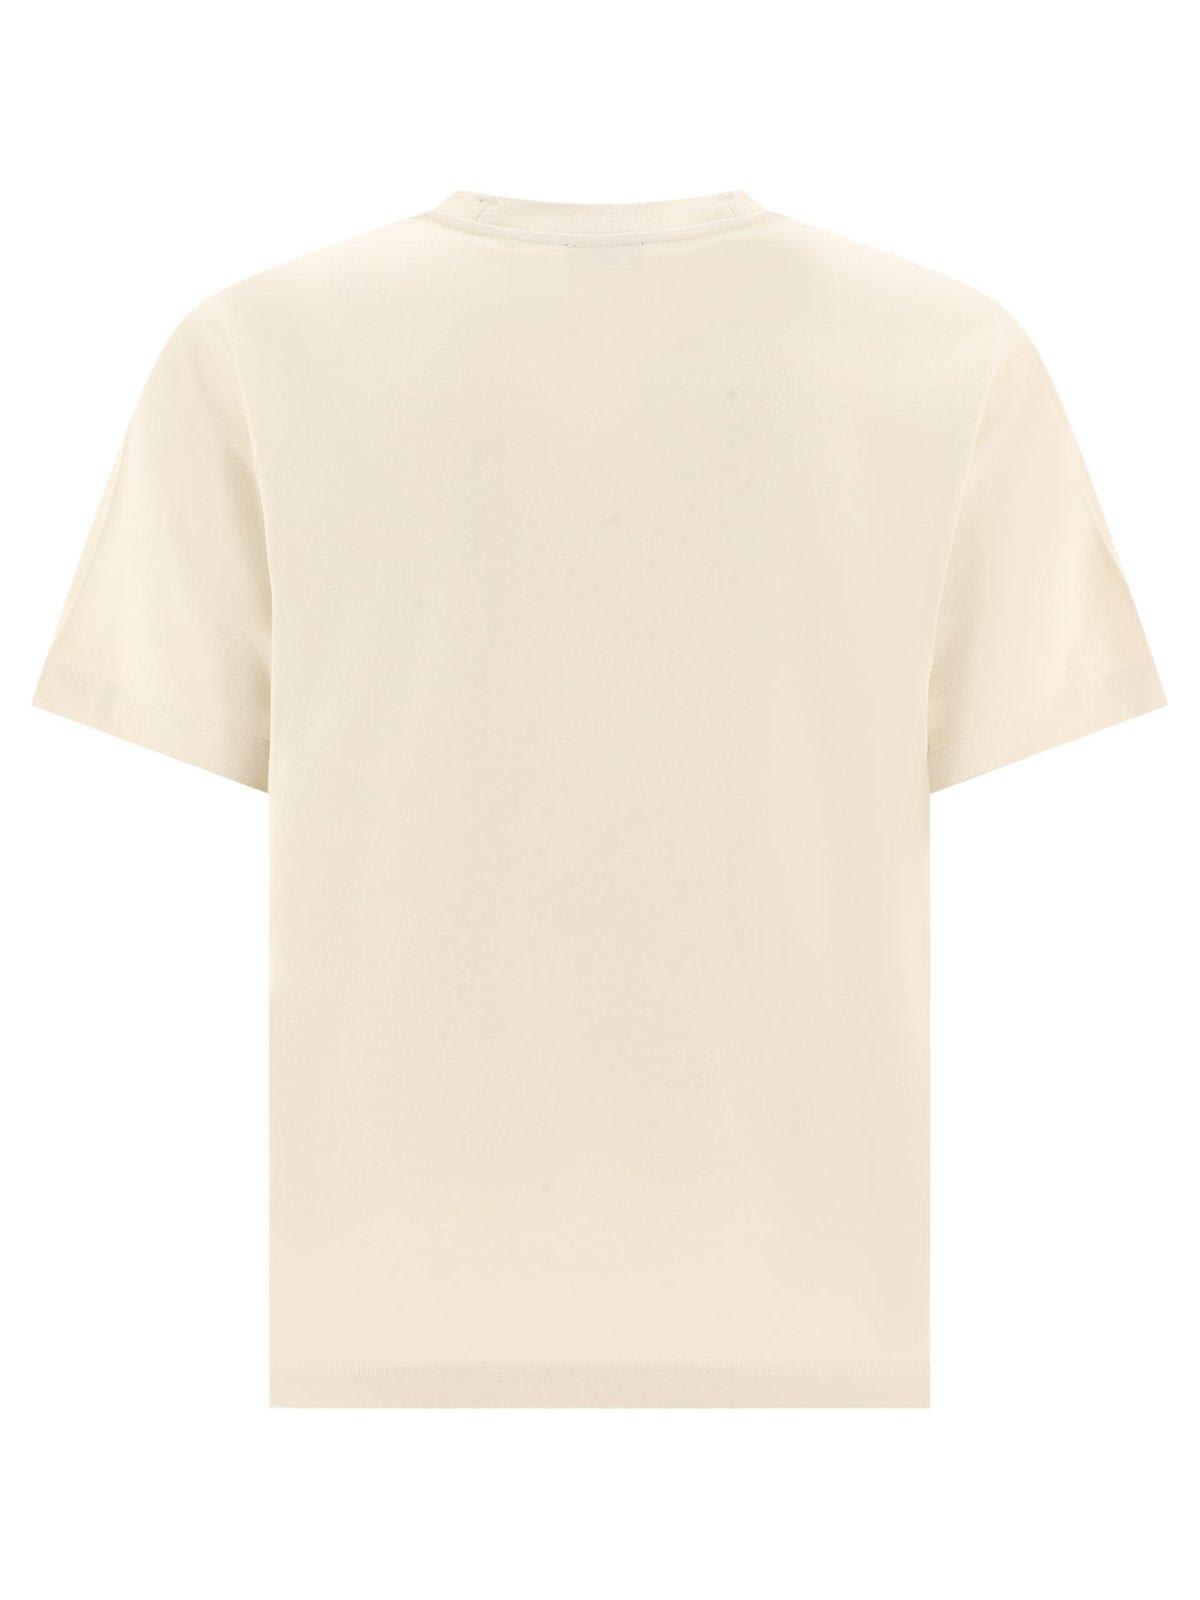 Shop Burberry Graphic Printed Crewneck T-shirt In Neutrals/blue